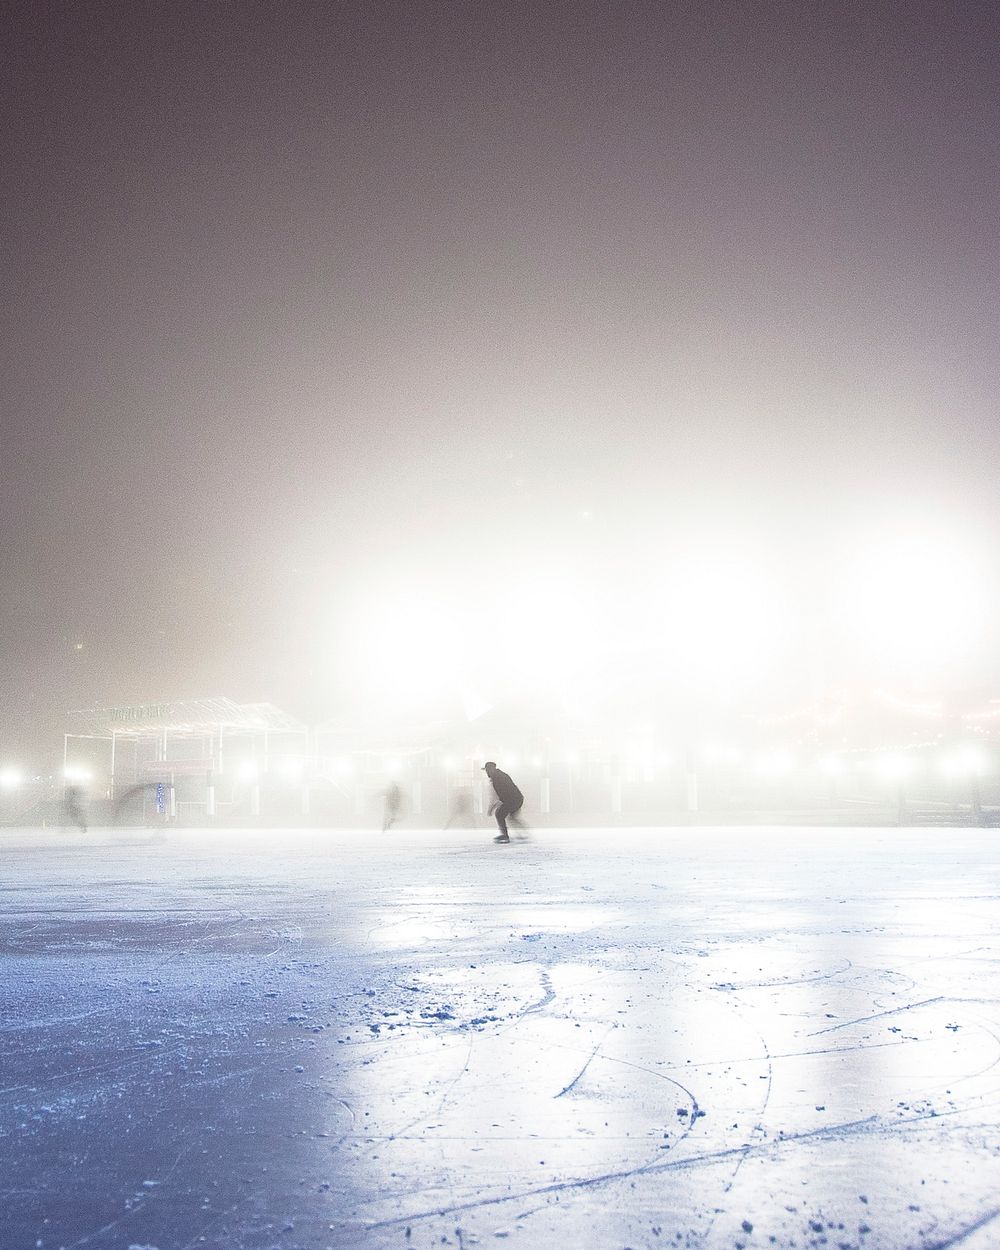 Silhouette of people skating on an ice rink on a misty winter night. Original public domain image from Wikimedia Commons